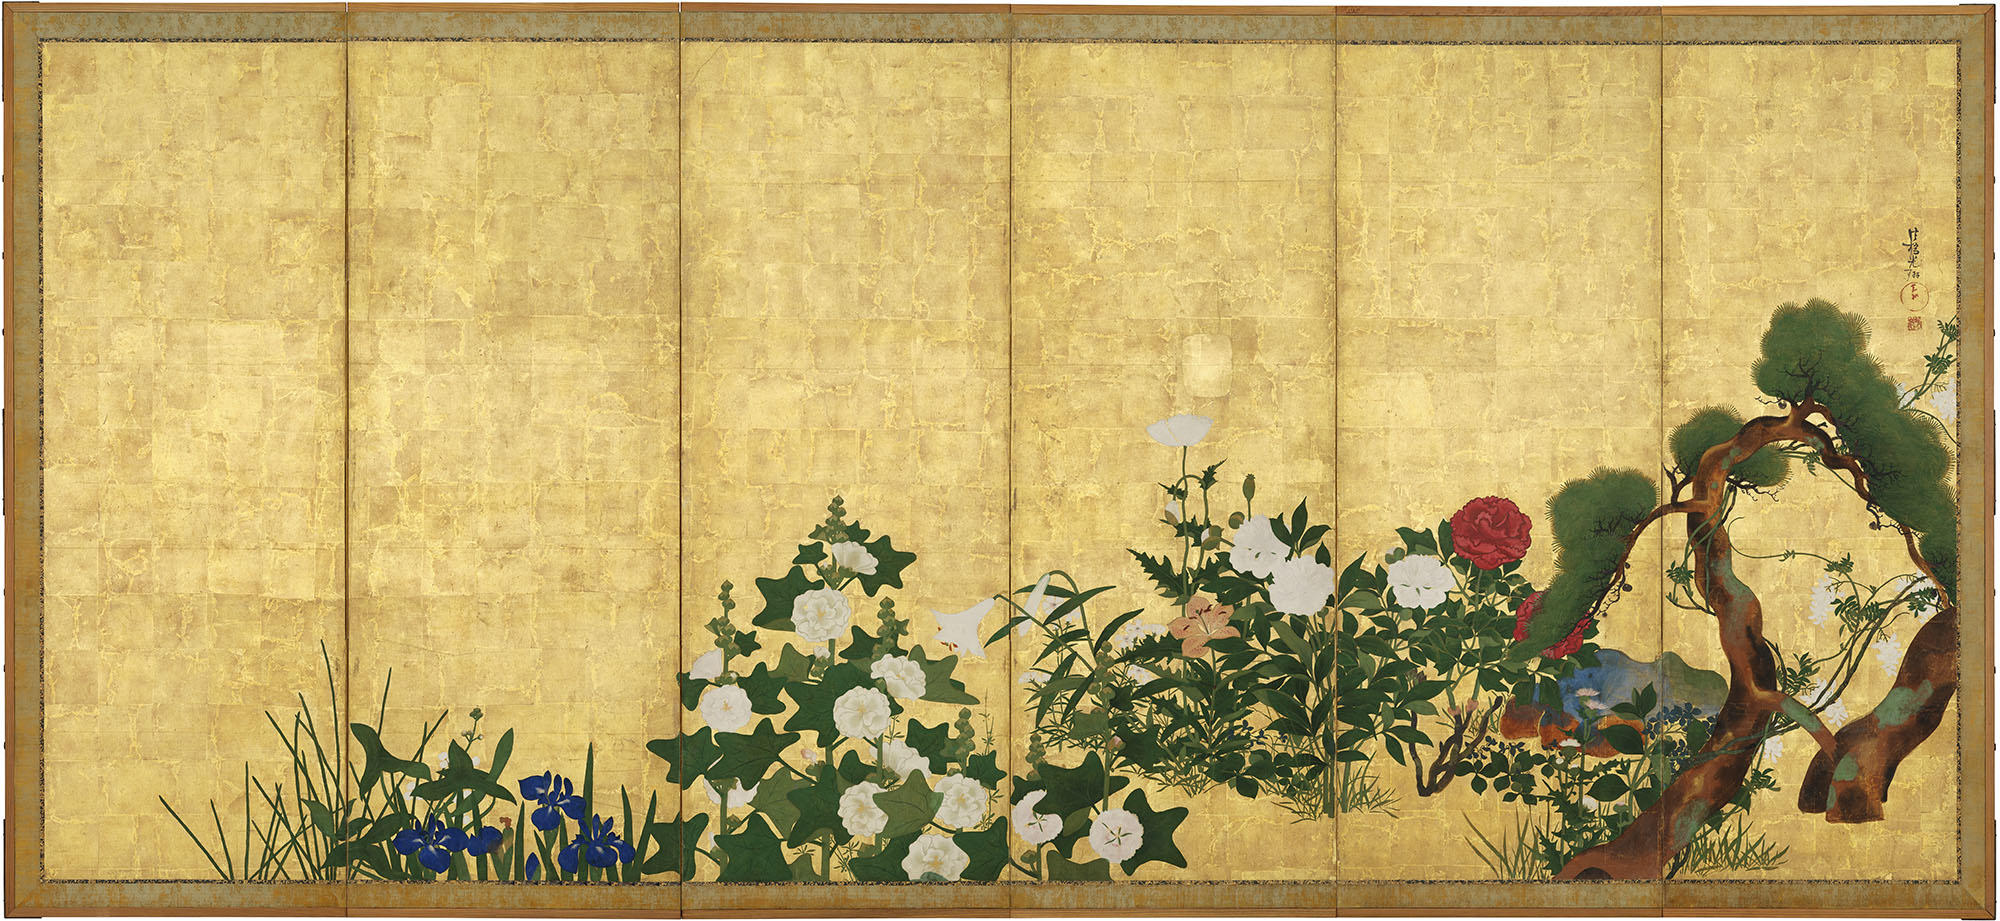 A six panel gold ground painting with plants that bloom in spring in Japan including from left to right arrowhead, Japanese iris, fig-leaved hollyhock, cleavers, Madonna lily, fringed pinks, opium poppy, tiger lily, peony, violet, tree peony, cabbage thistle, Japanese umbrella pine, and silky wisteria.